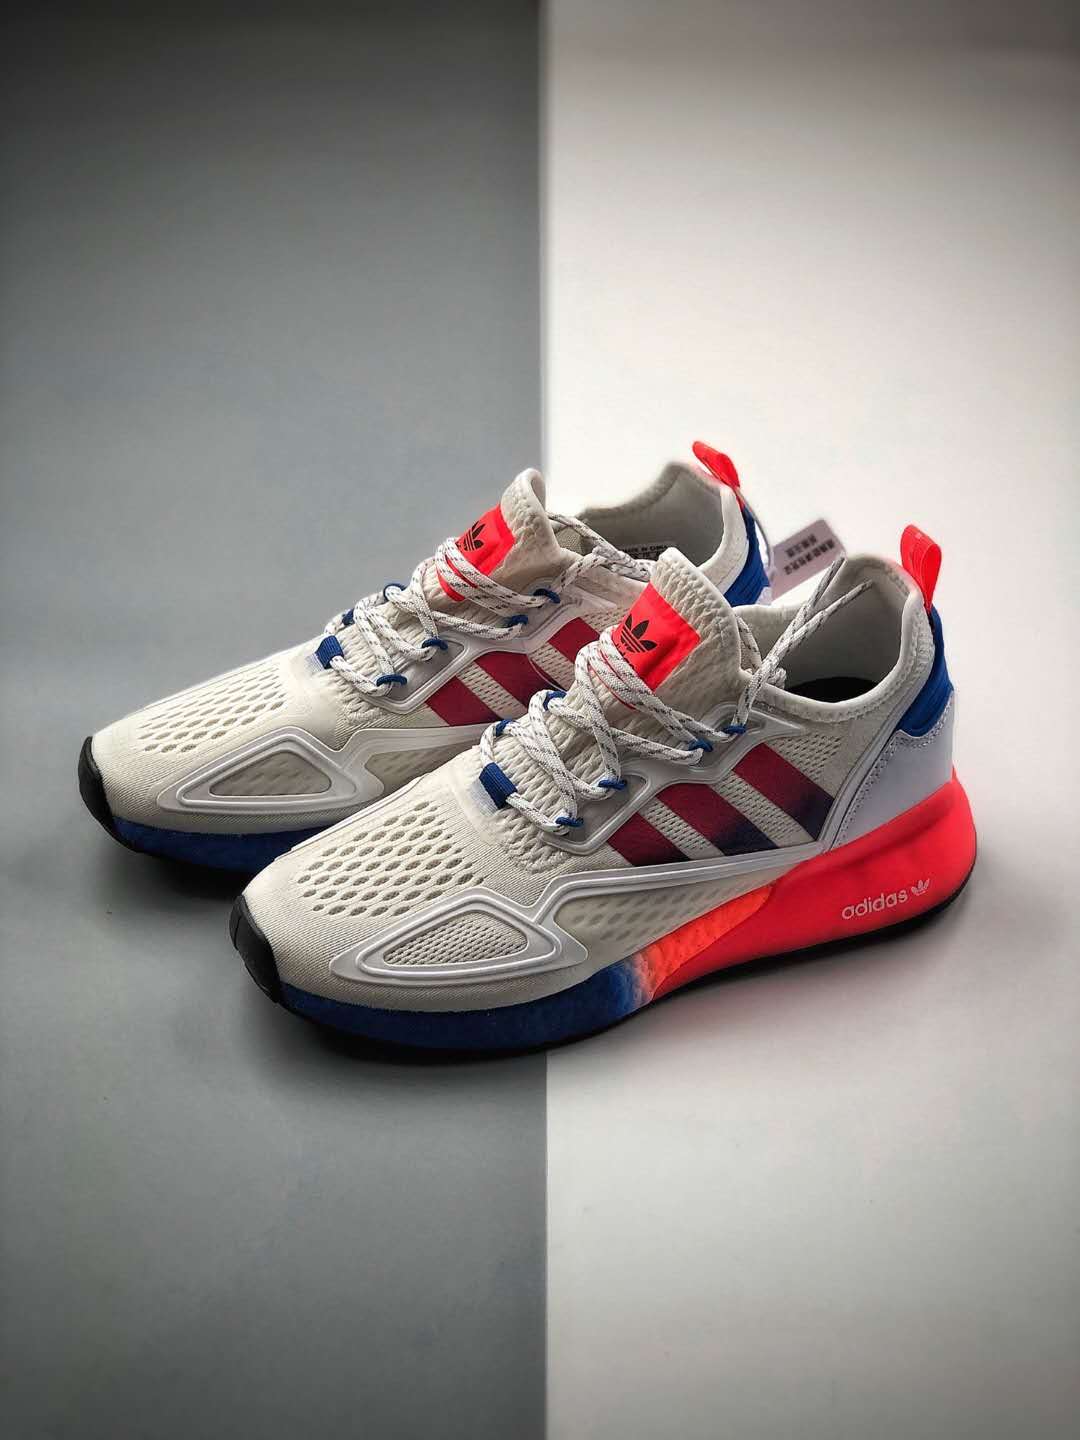 Adidas ZX 2K Boost FV9996 - Shop the Latest Originals Sneakers